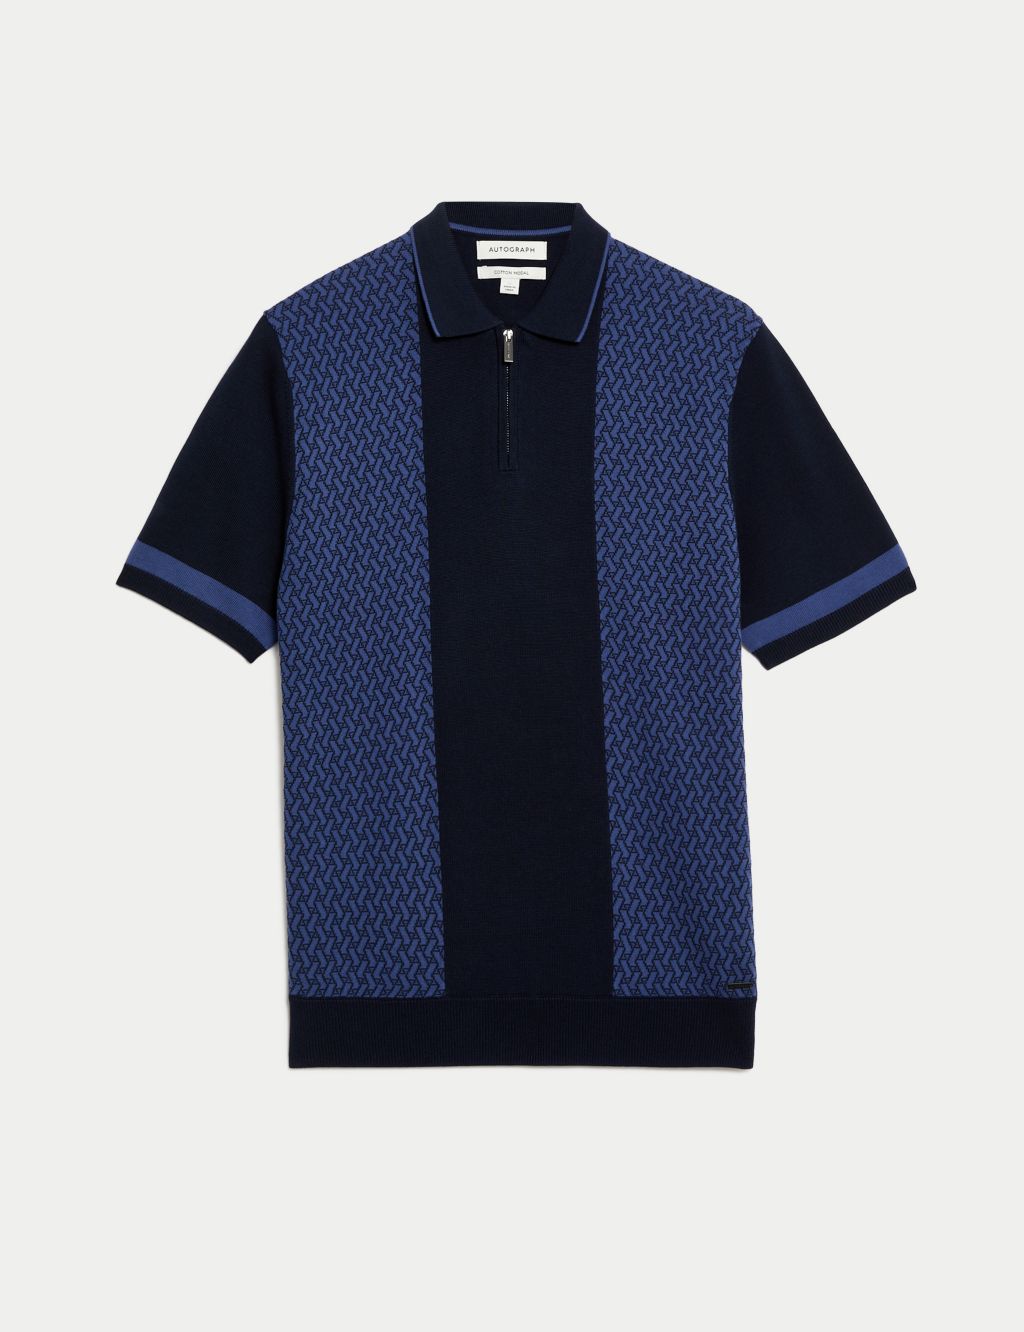 Cotton Rich Zip Up Knitted Polo Shirt image 2